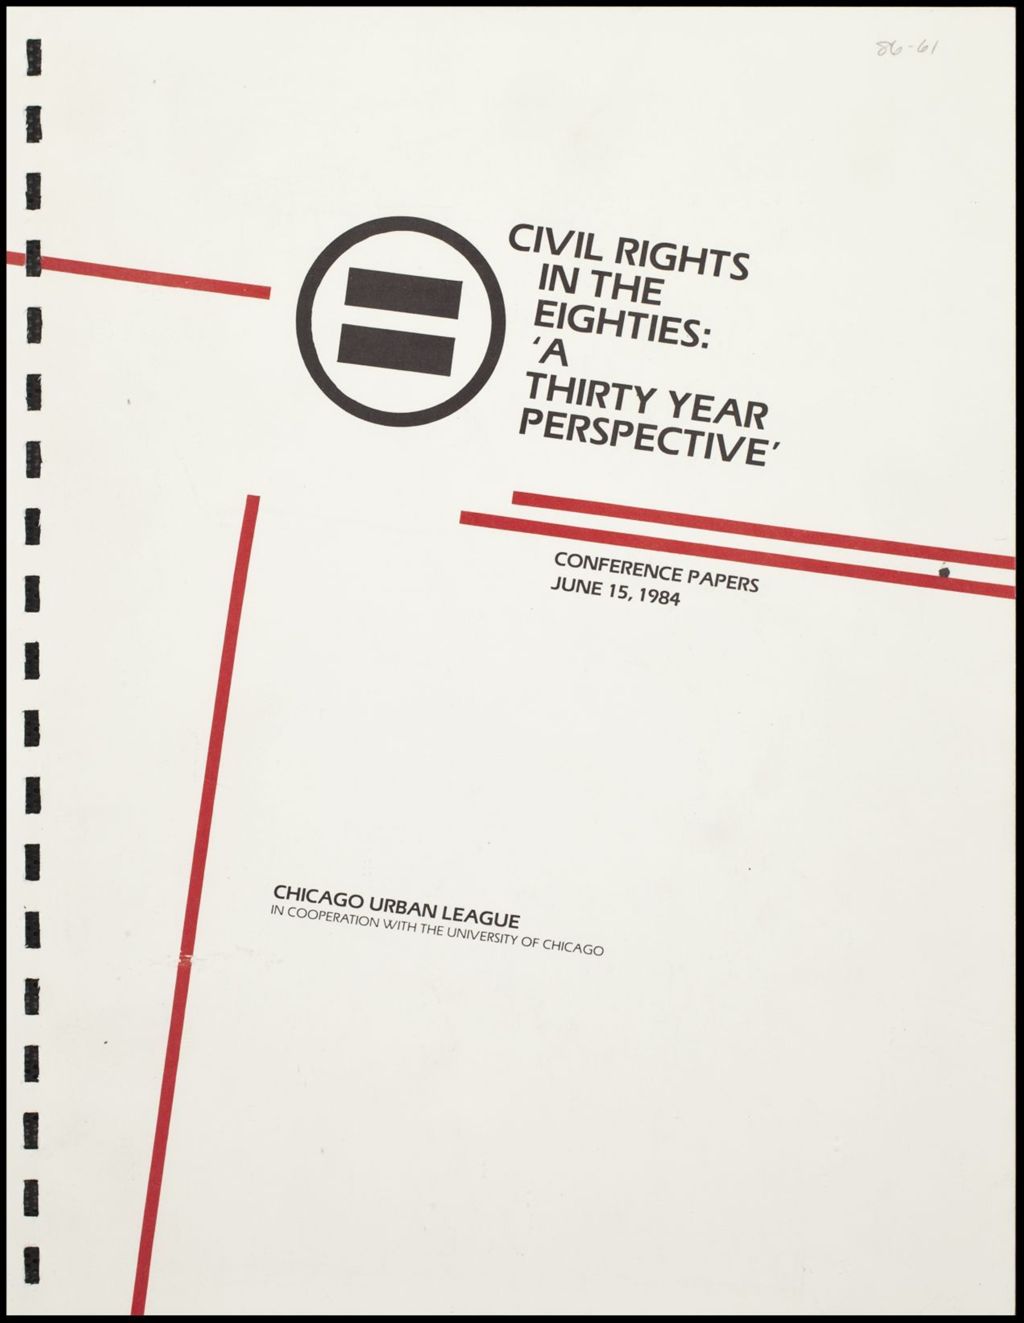 Civil Rights in the 1980's, 1984 (Folder III-2954)